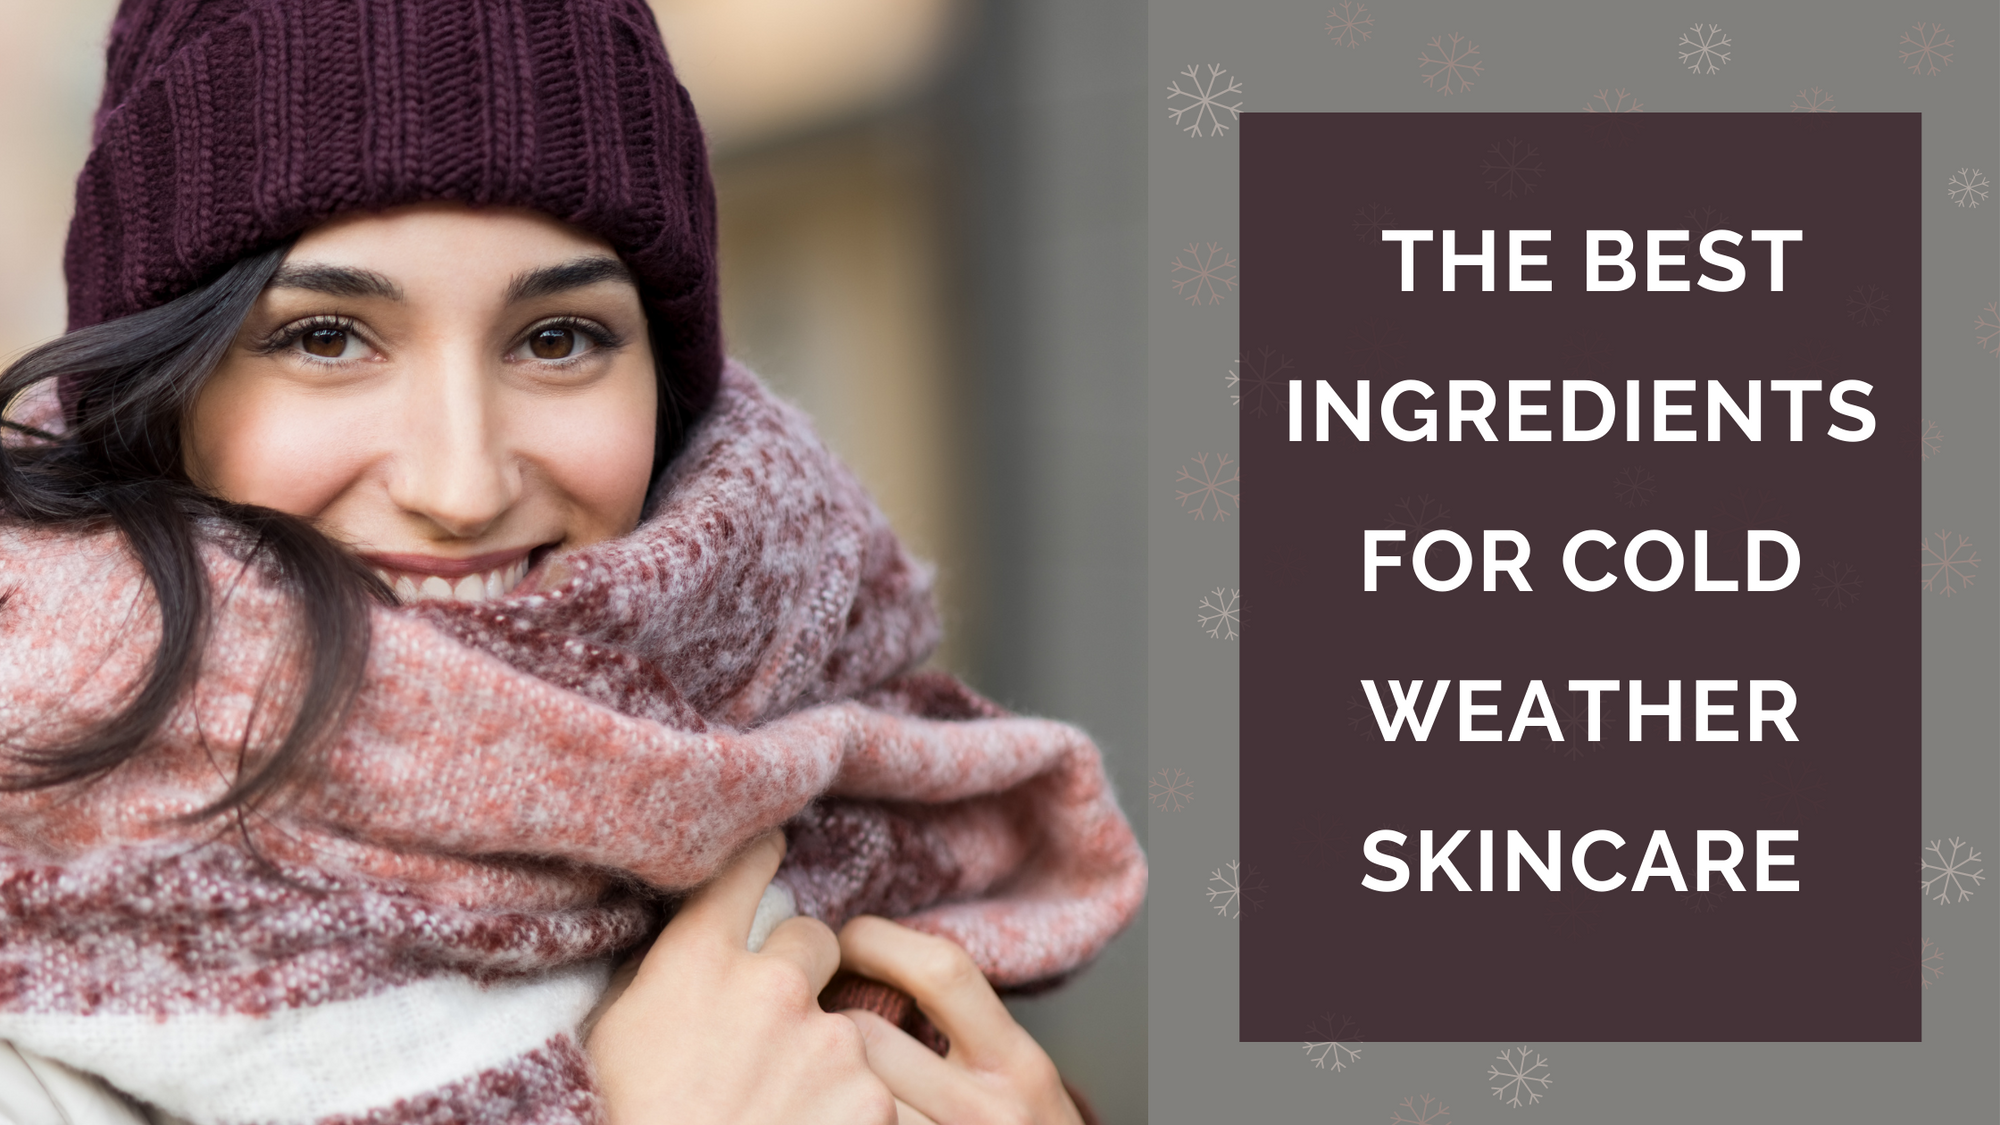 The Best Skincare Ingredients for Cold Weather